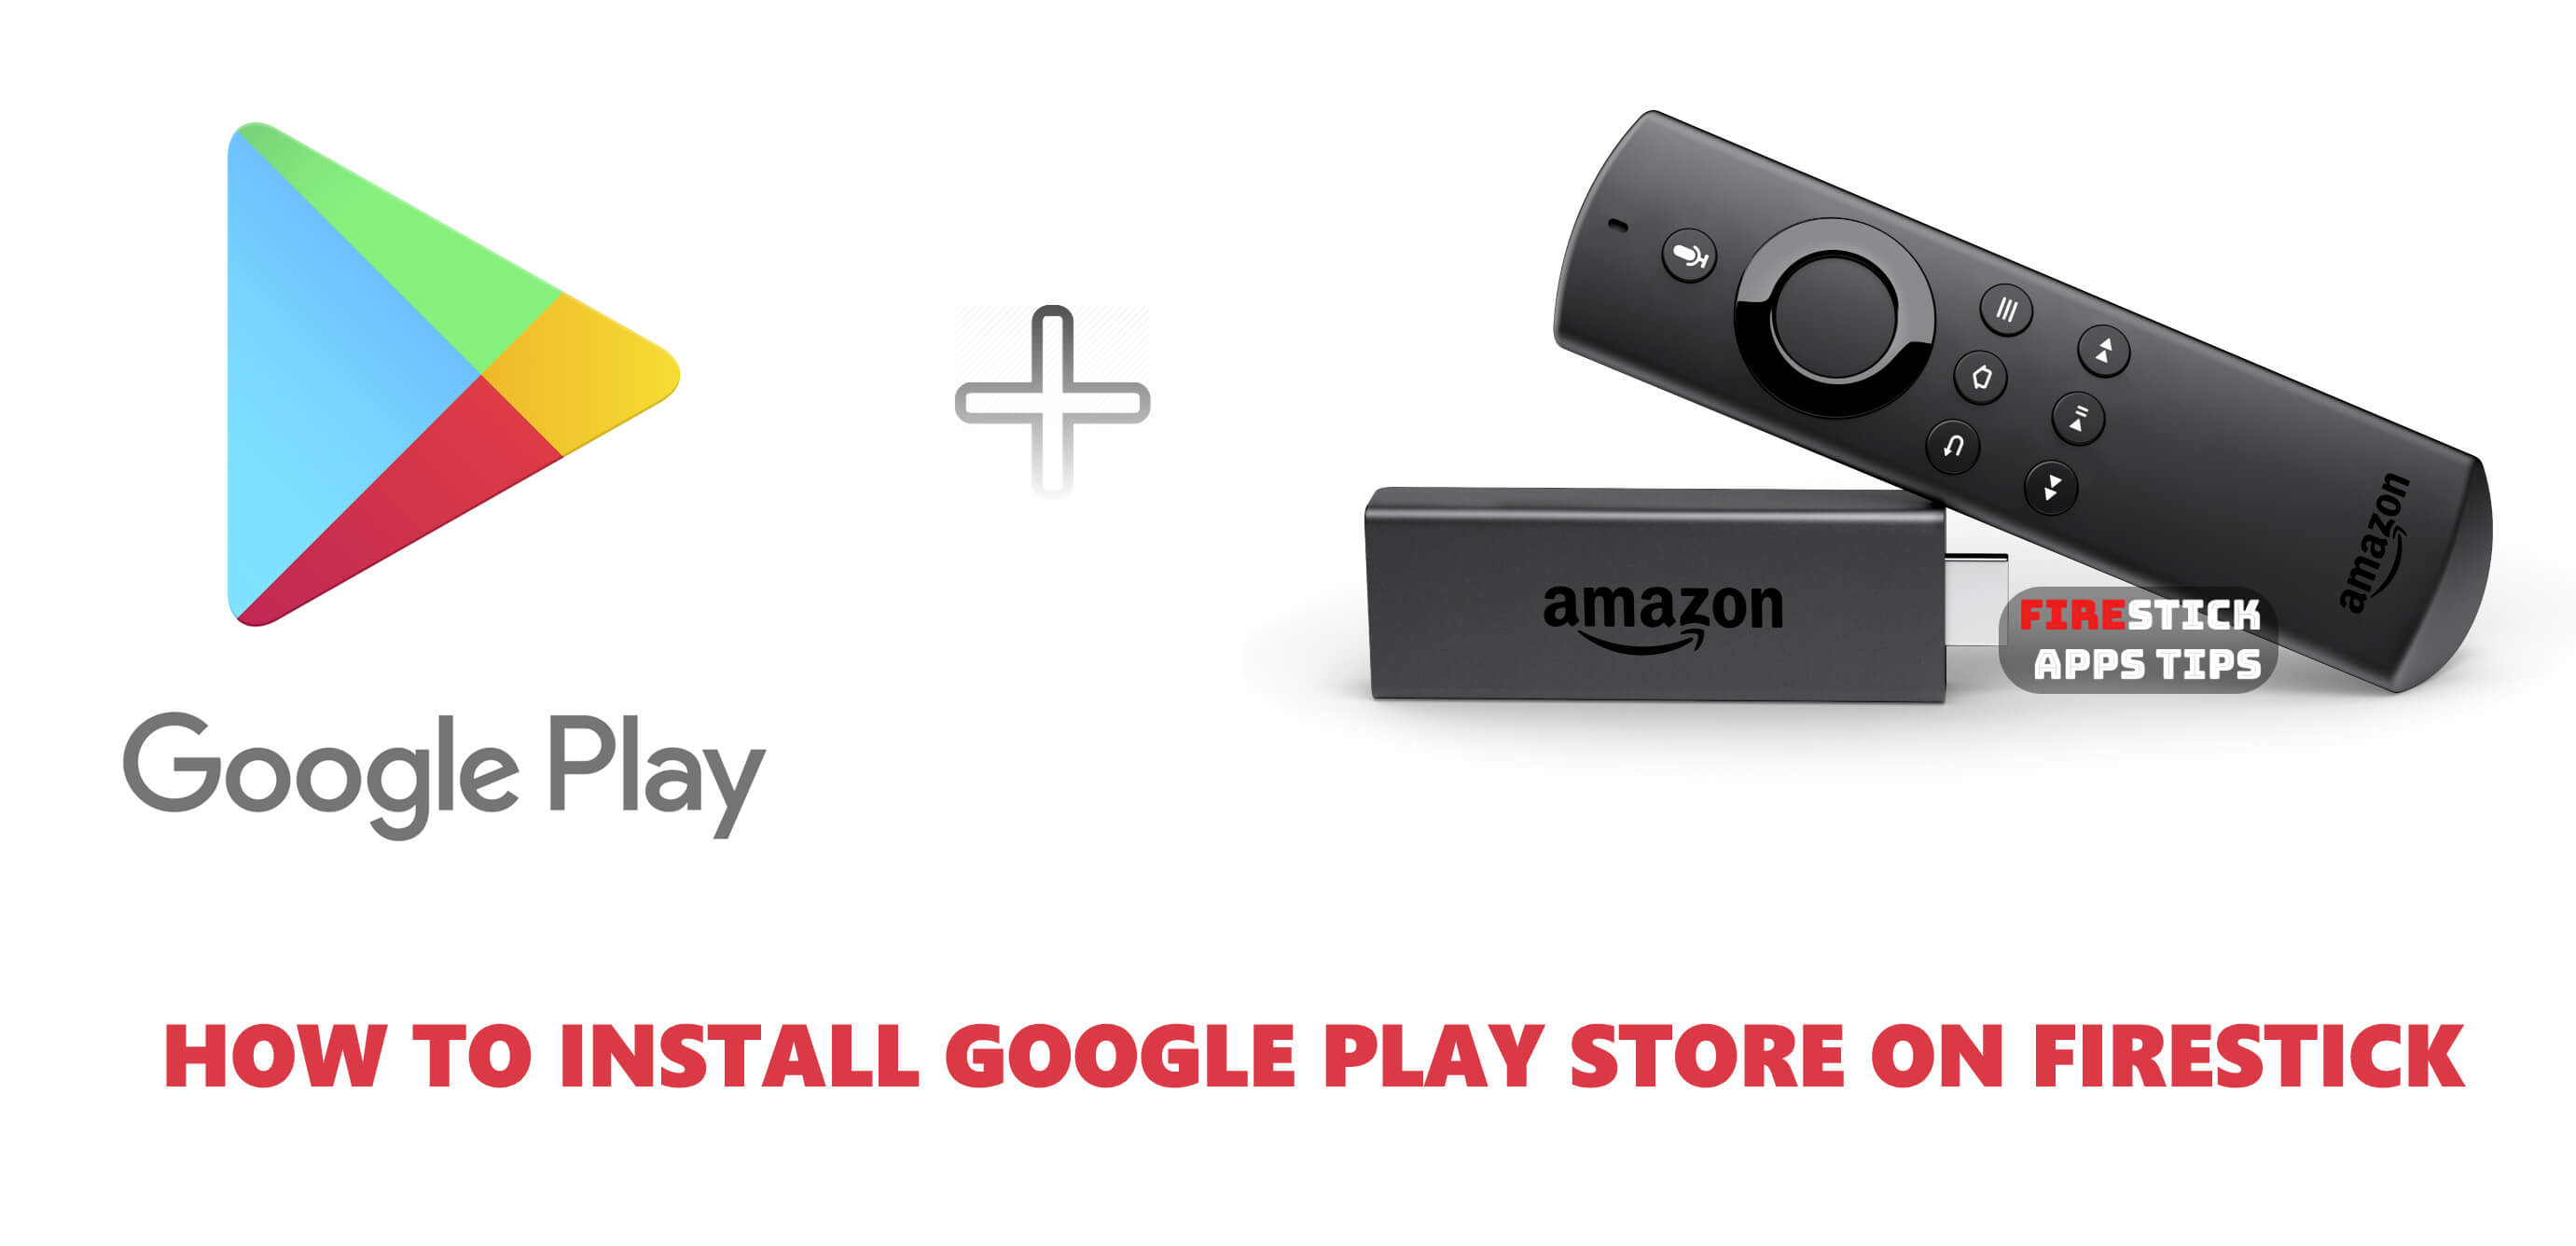 How to Install Google Play on Firestick / Fire TV [2021]